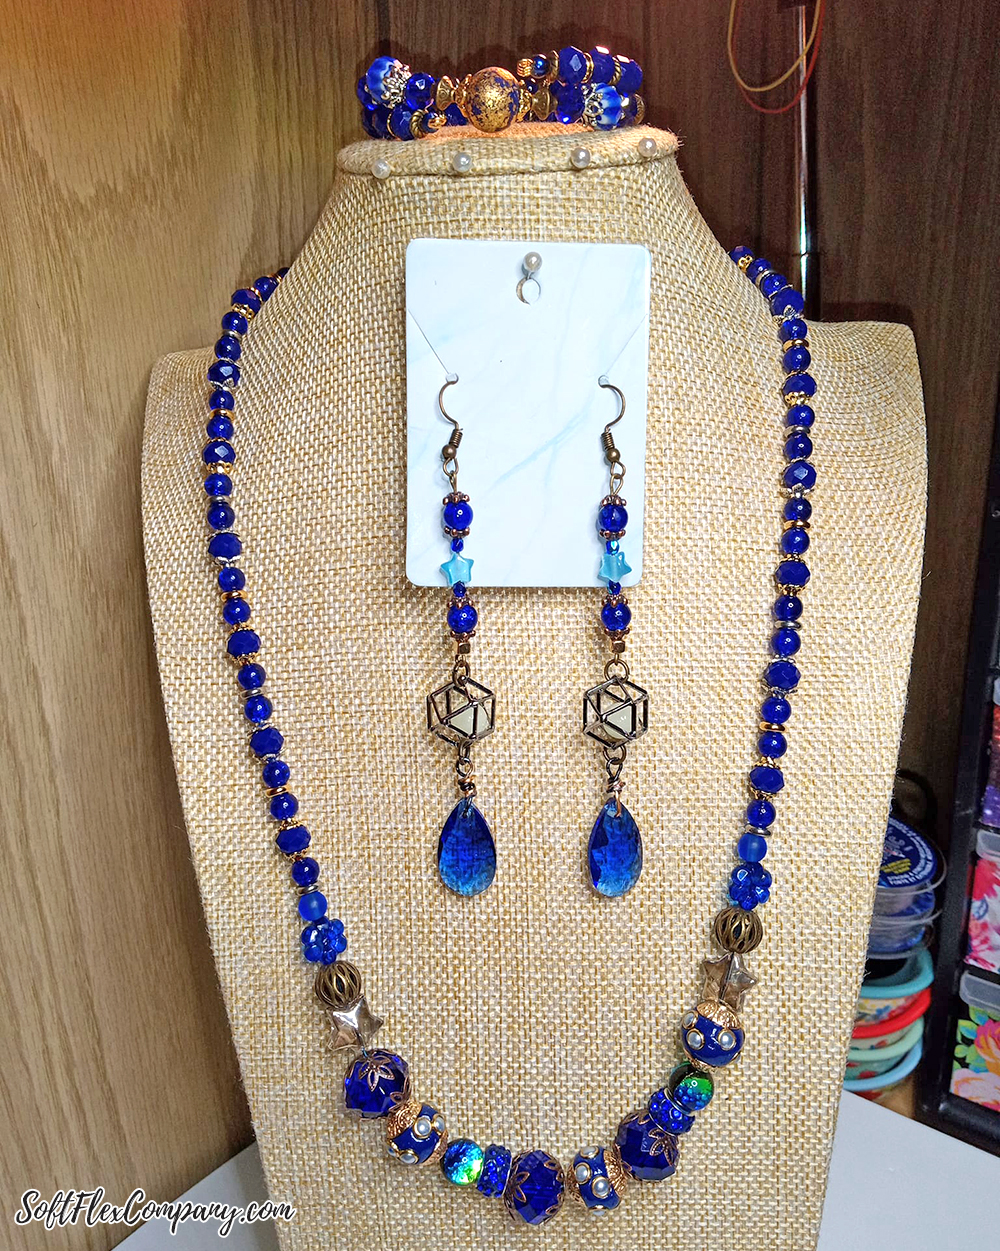 Camp Out Jewelry by Sharon Wellford